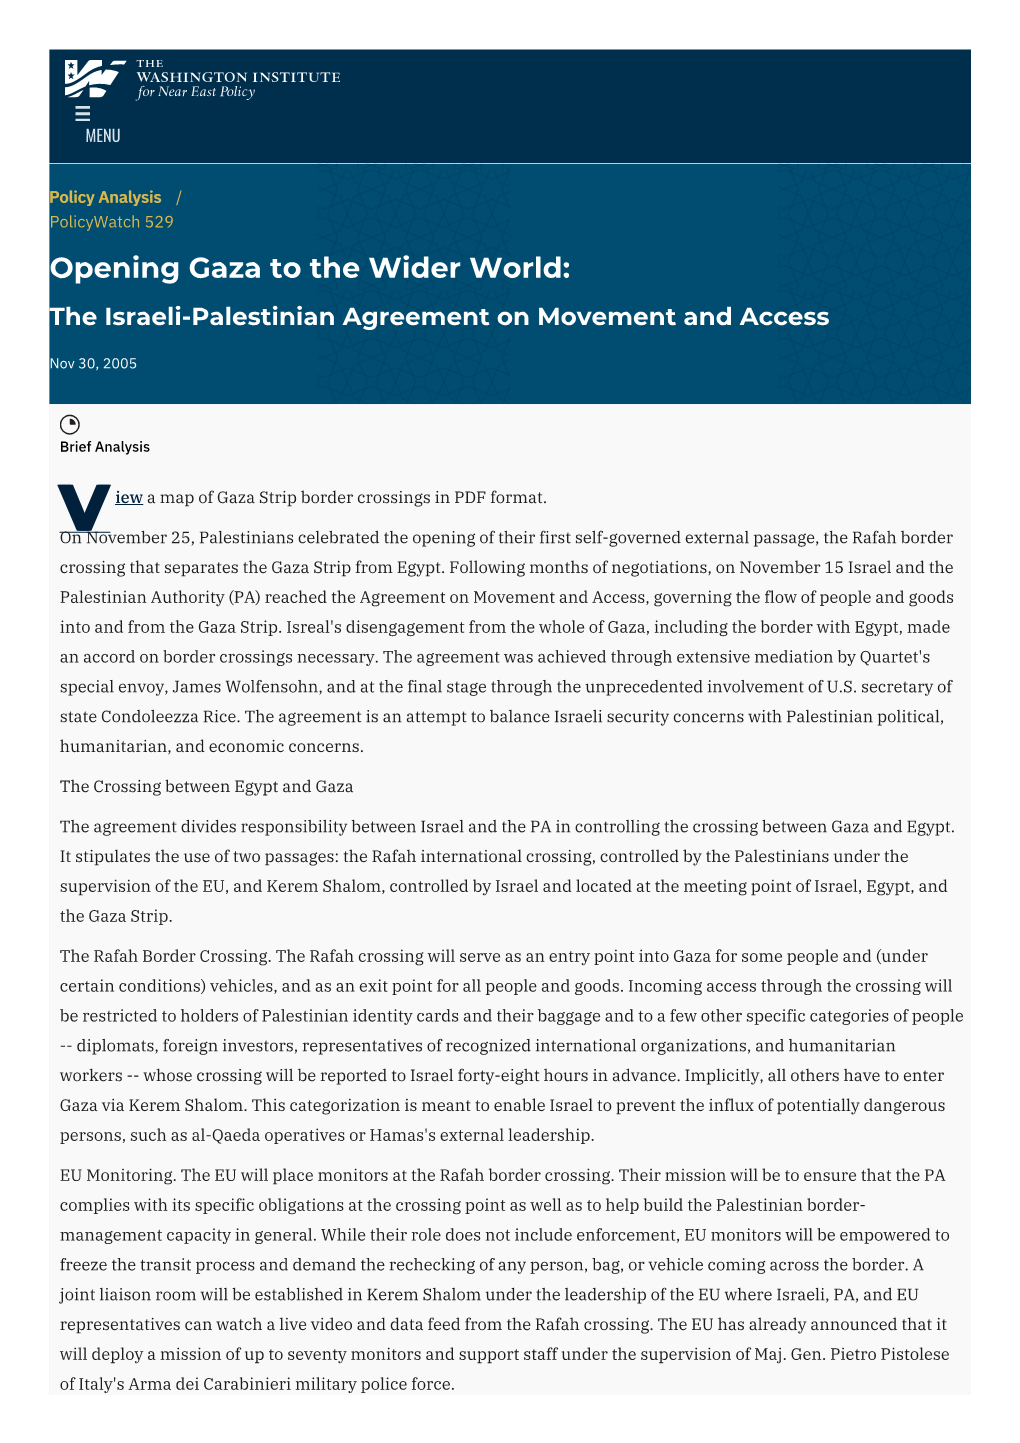 Opening Gaza to the Wider World: the Israeli-Palestinian Agreement on Movement and Access